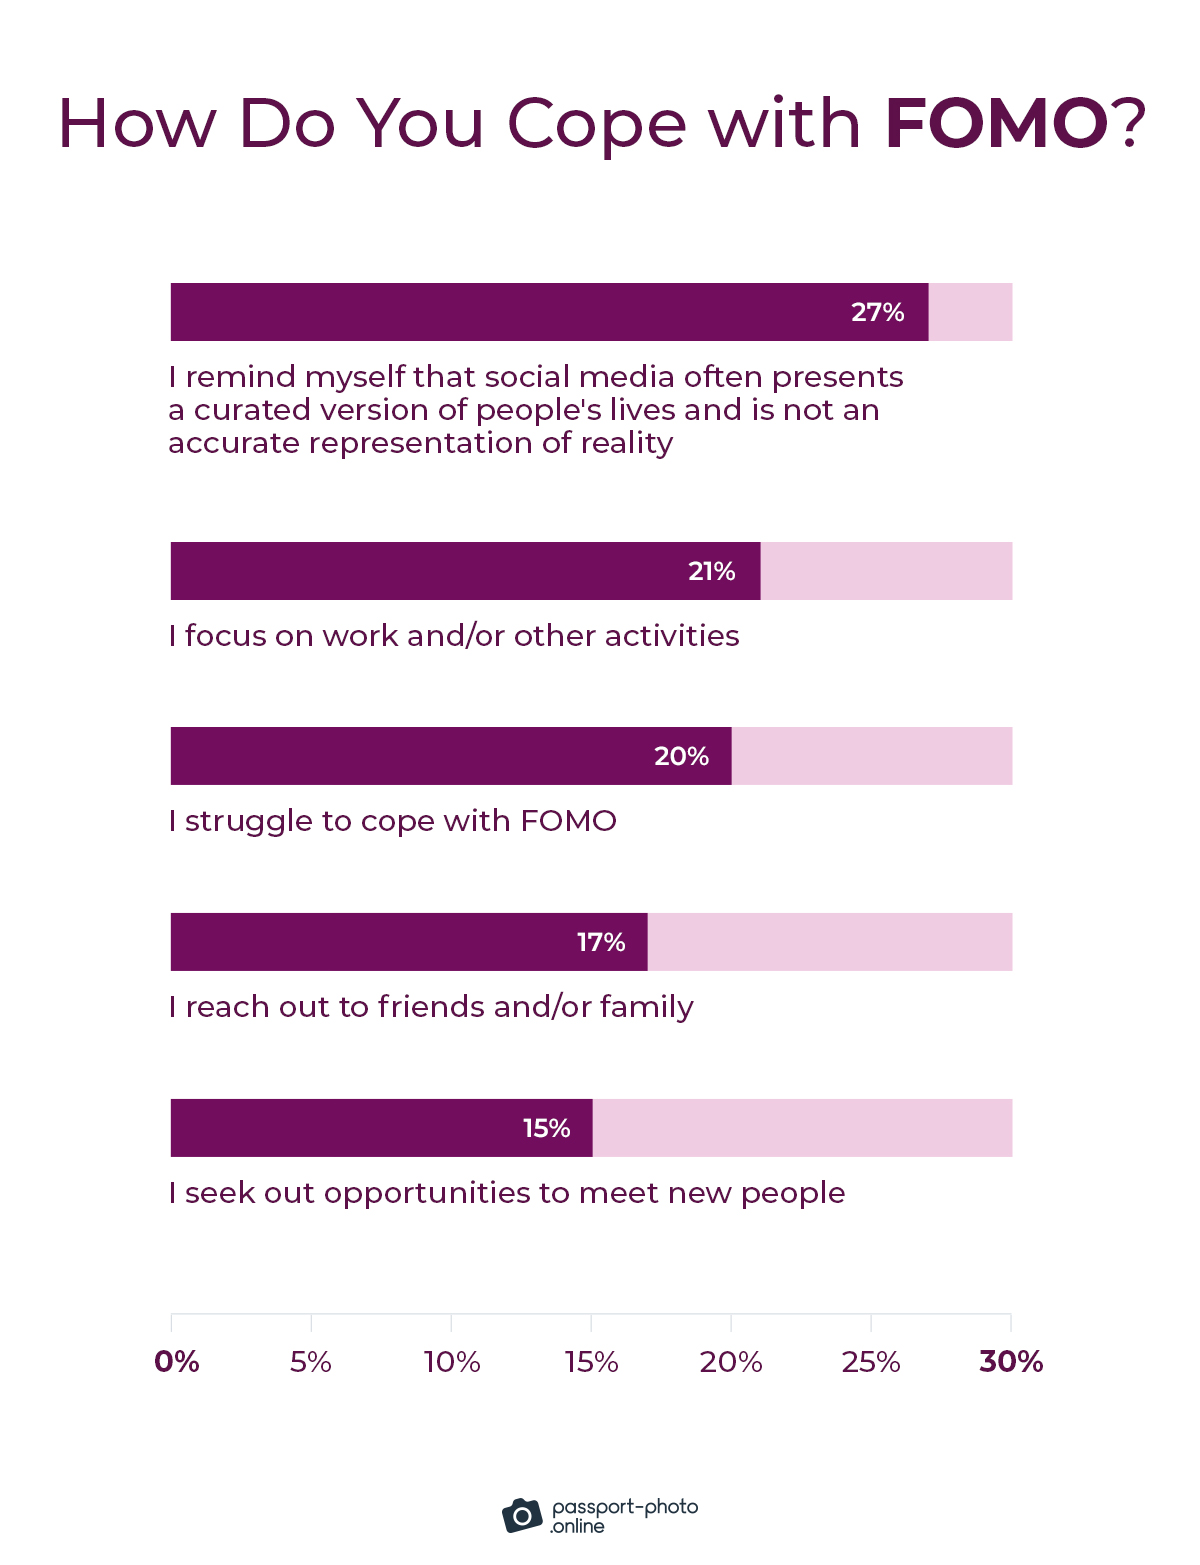 most digital nomads (27%) recognize that social media portrays a curated version of people's lives and is not entirely accurate